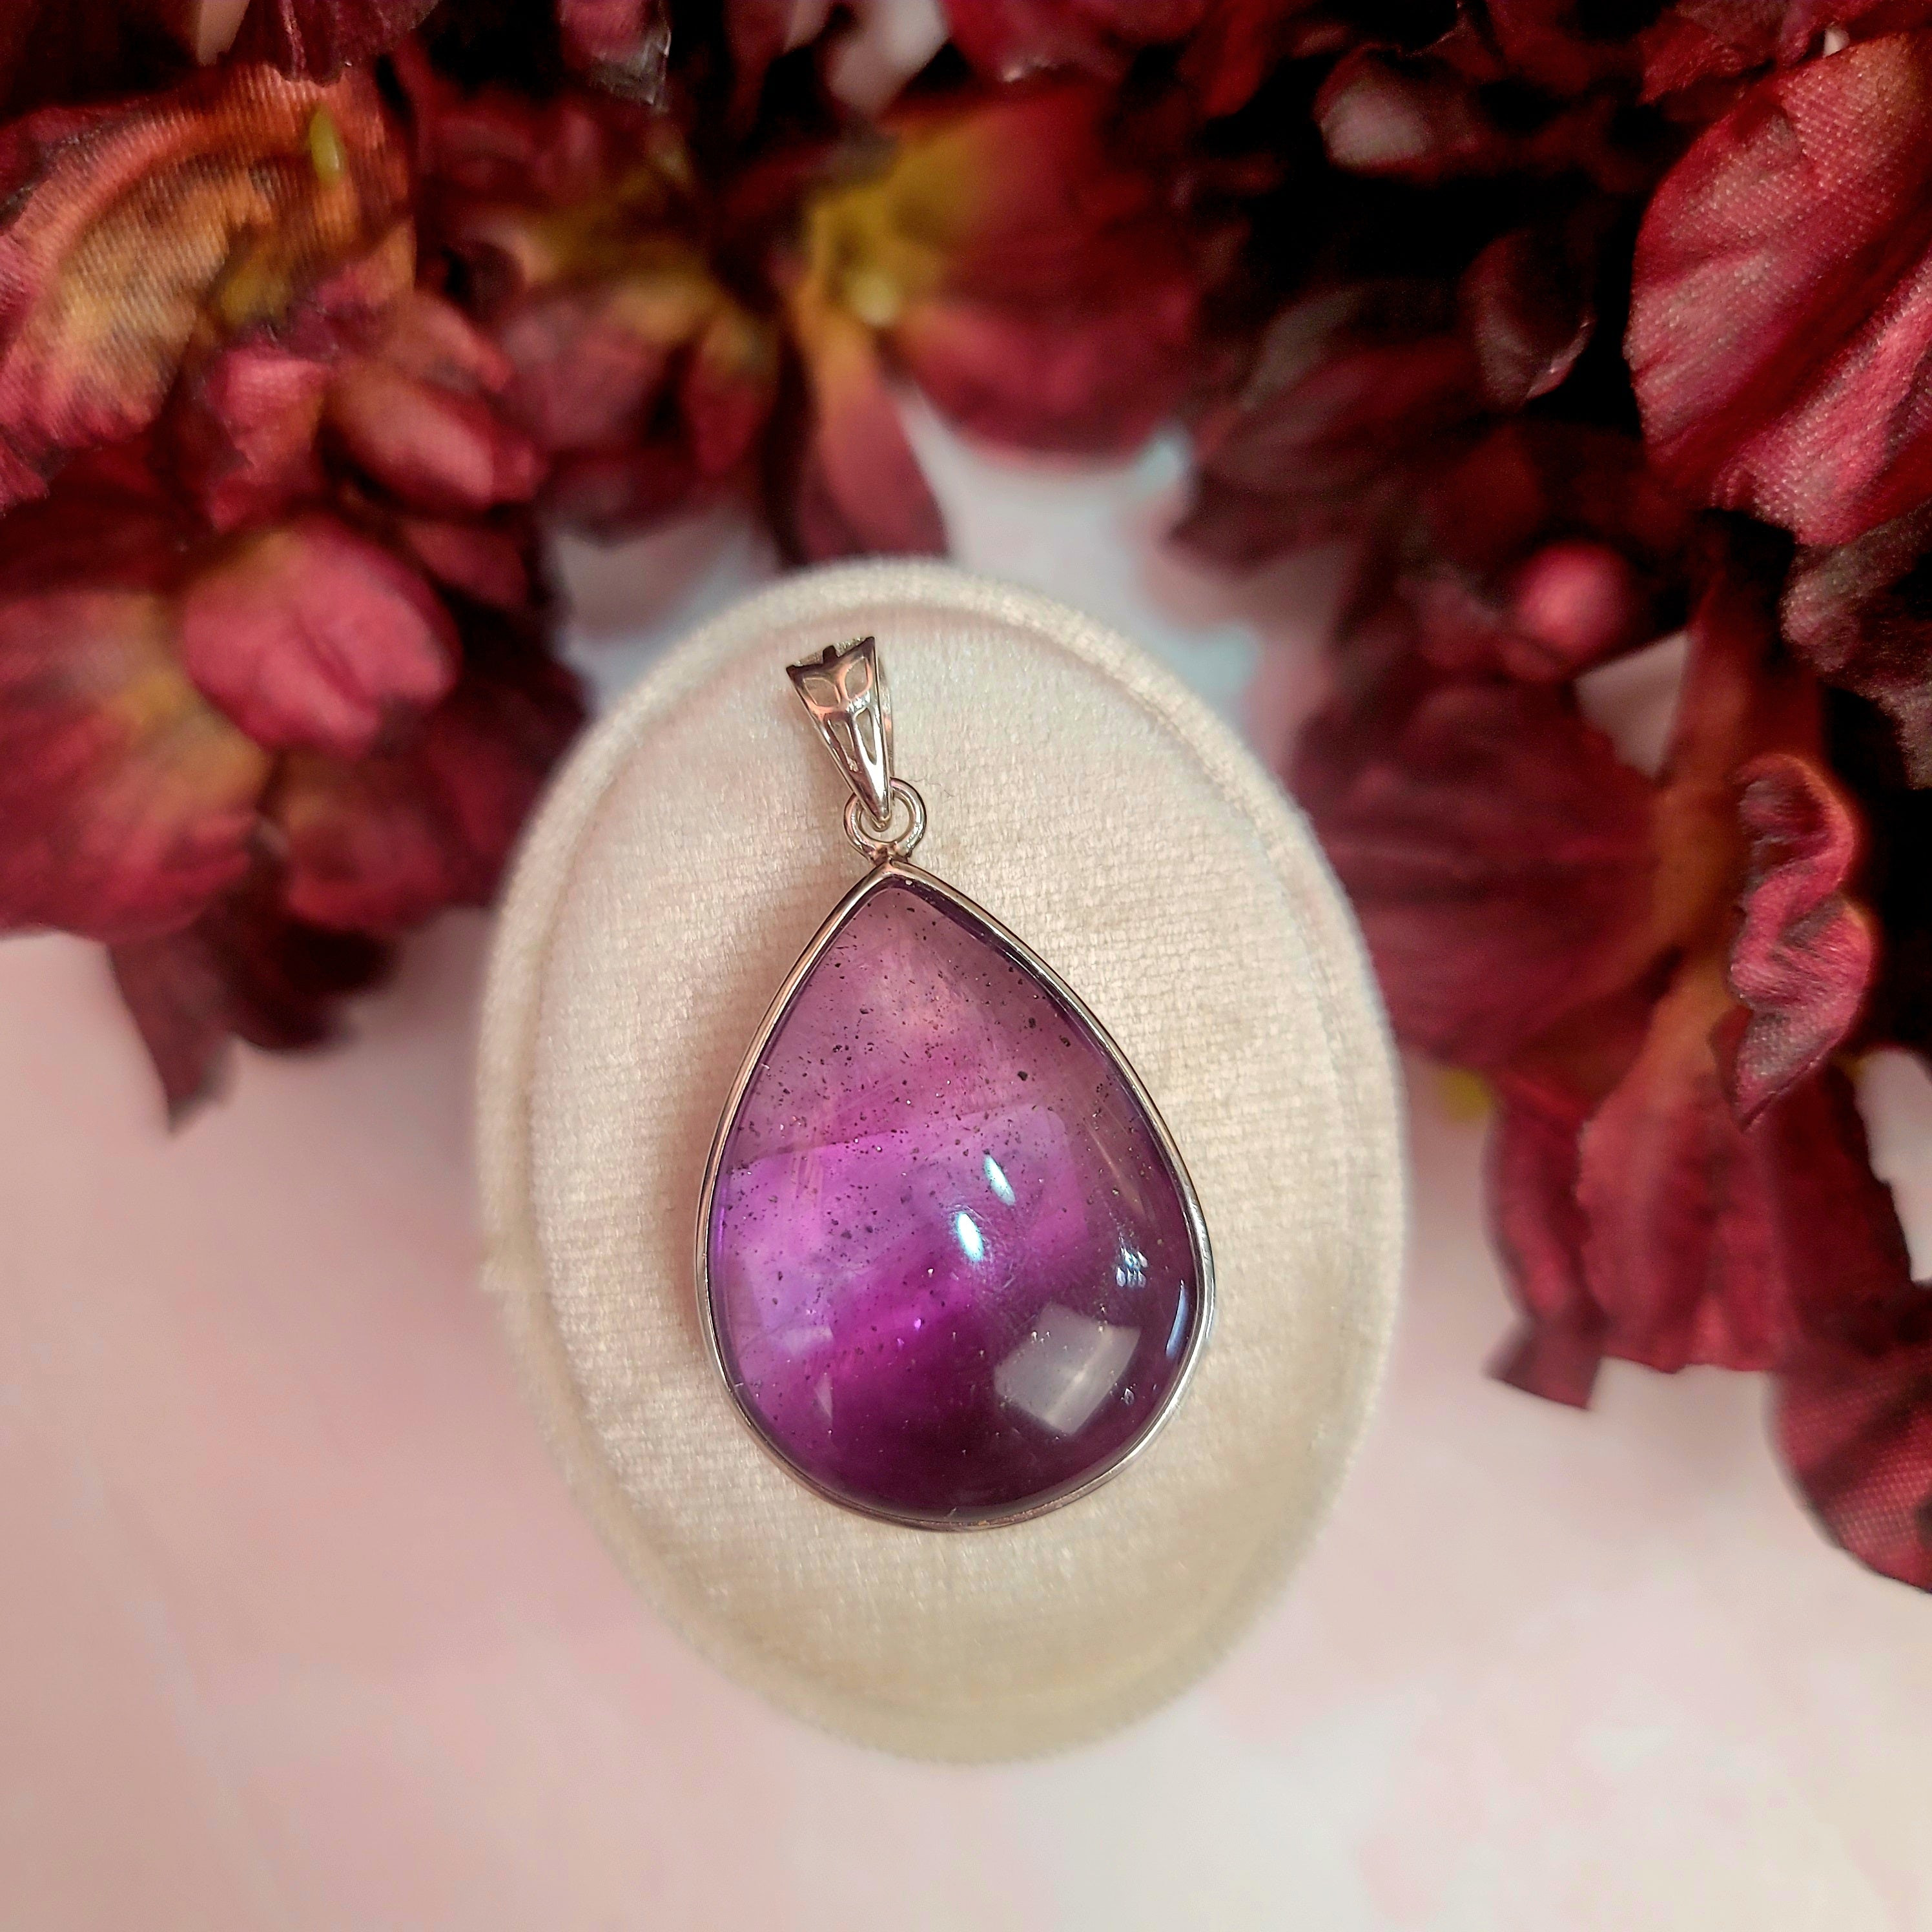 Fluorite with Pyrite Inclusions Pendant for Good Luck, Focus and Mental Clarity